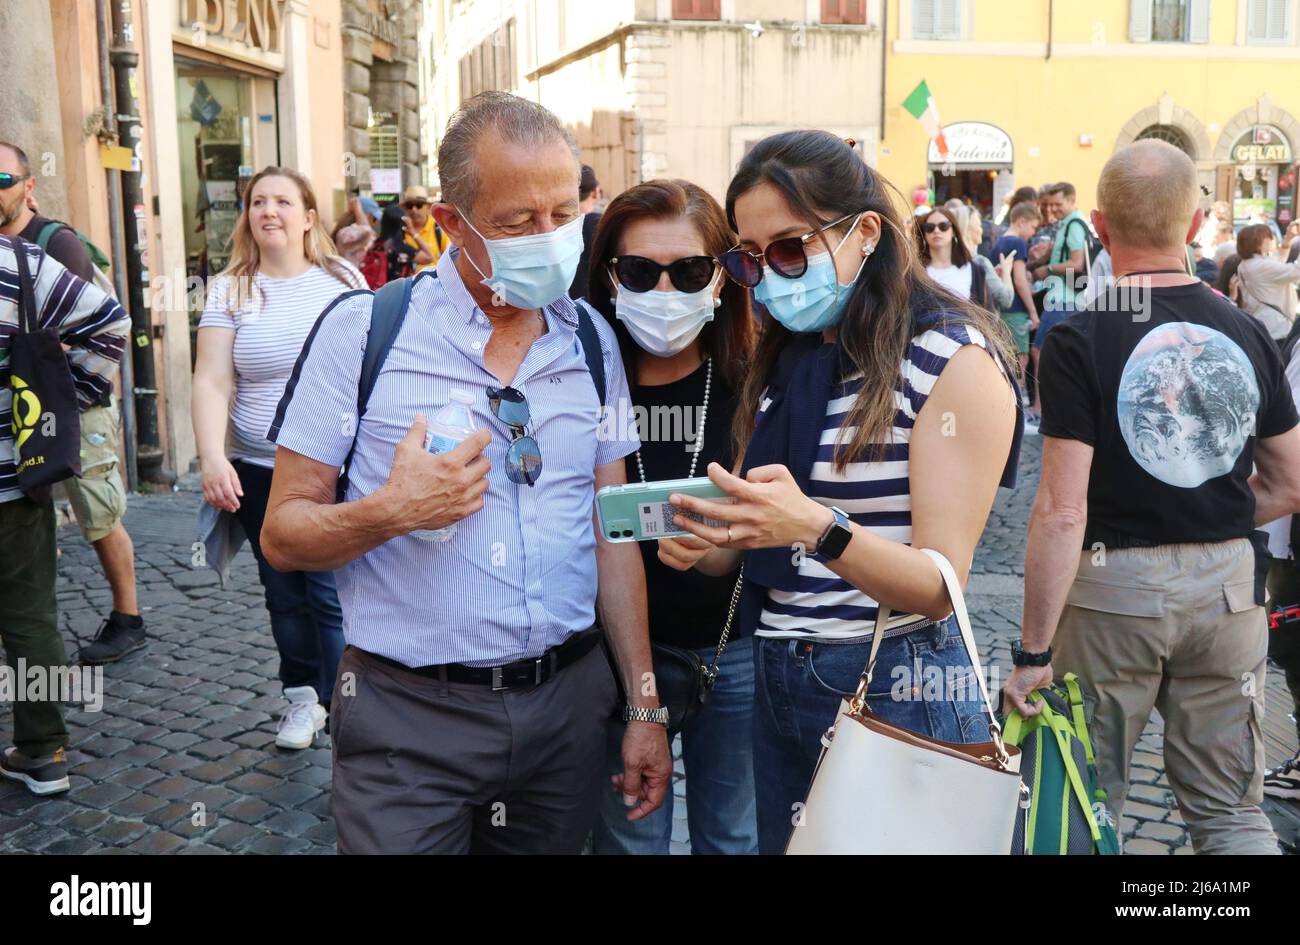 People wearing masks in Rome, Italy, April 29 2022. Italian Health minister Roberto Speranza announced that, in order to prevent a new spread of Covid 19 virus, Italy will extend mandatory indoor masks in some places until 15 June. This happened few days before Italy' rules of Covid 19 prevention expire on April 30. The requirement to wear masks will remain on public transports, in hospitals, rest houses, schools, universities, cinemas and theatres, at concerts and indoor sporting events. From May 1 on, instead, wearing masks will be optional in indoor restaurants and cafés, shops, supermarket Stock Photo